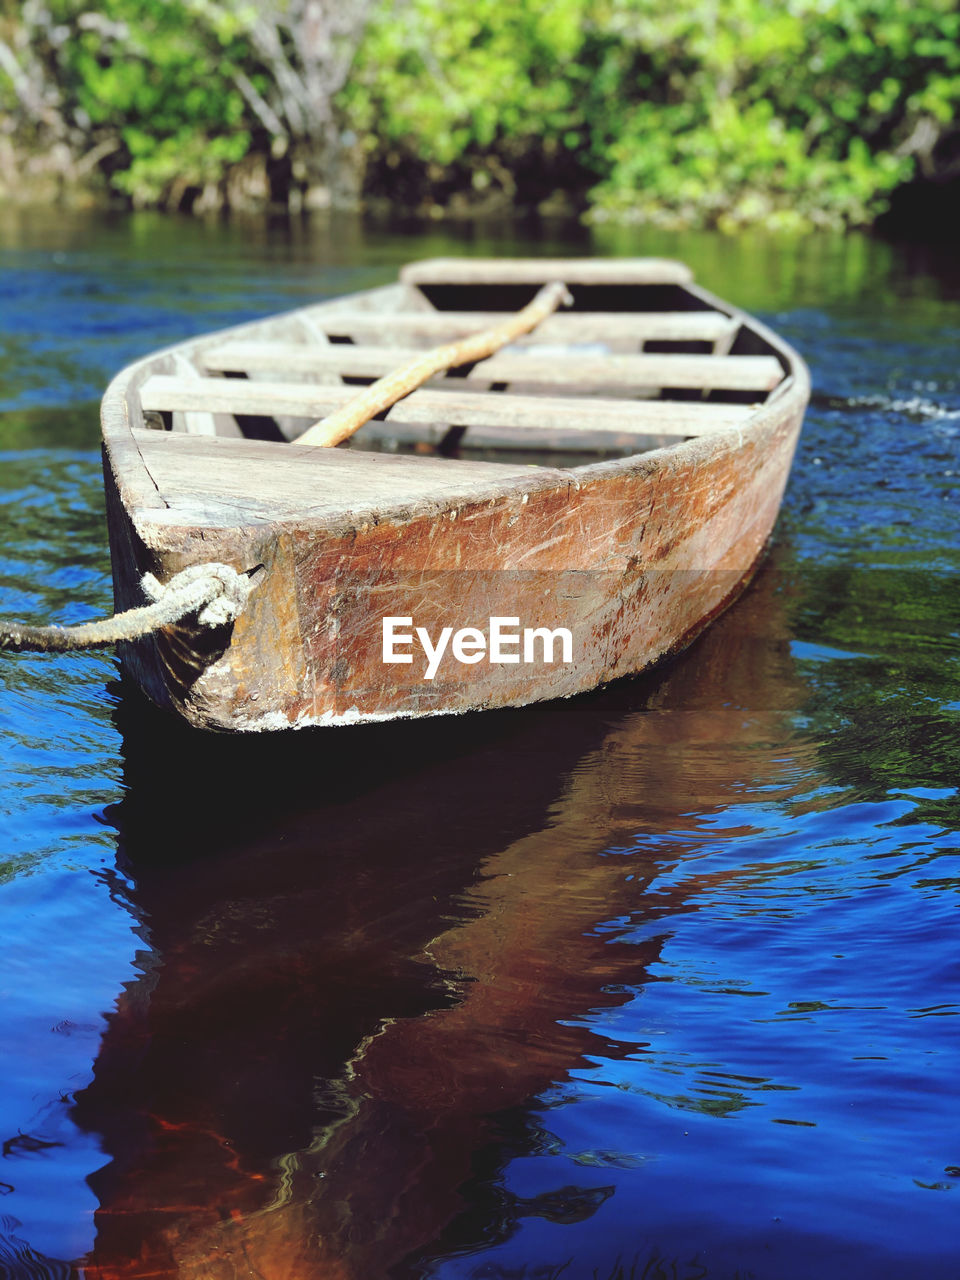 CLOSE-UP OF RUSTY BOAT MOORED IN LAKE